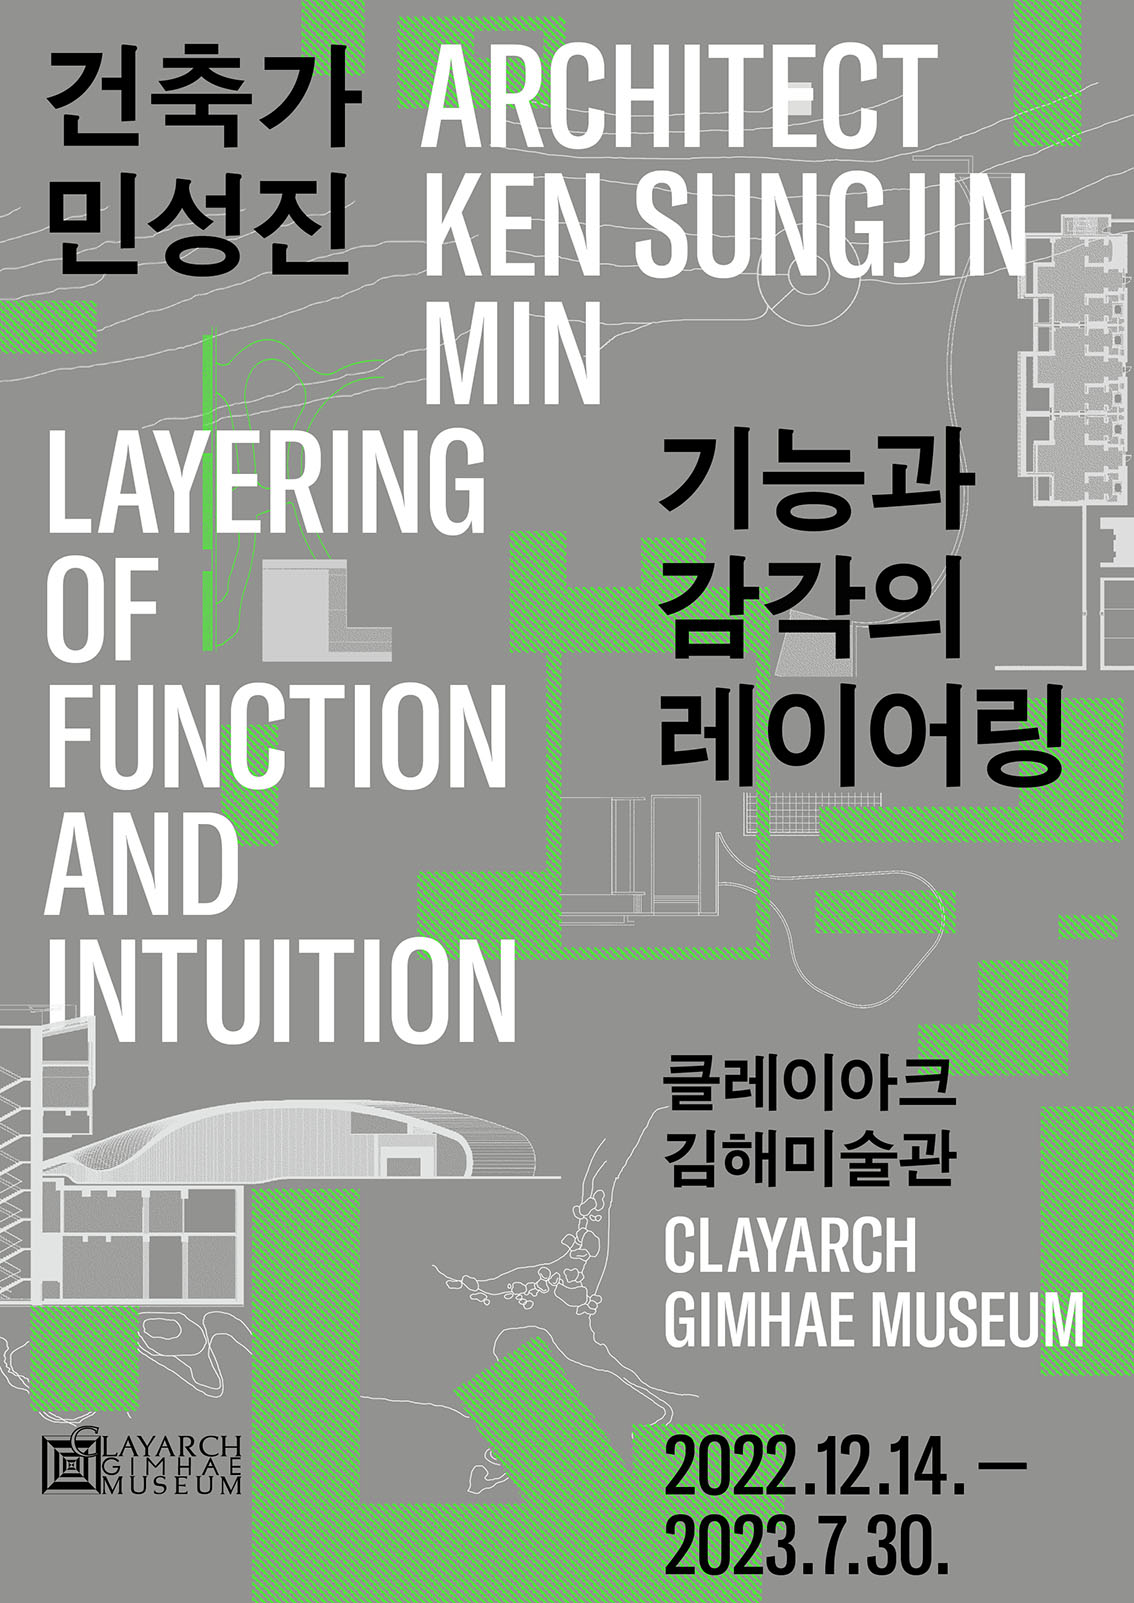 [2022 Plan] Architect ken sungjin min, Layering of function and intuition